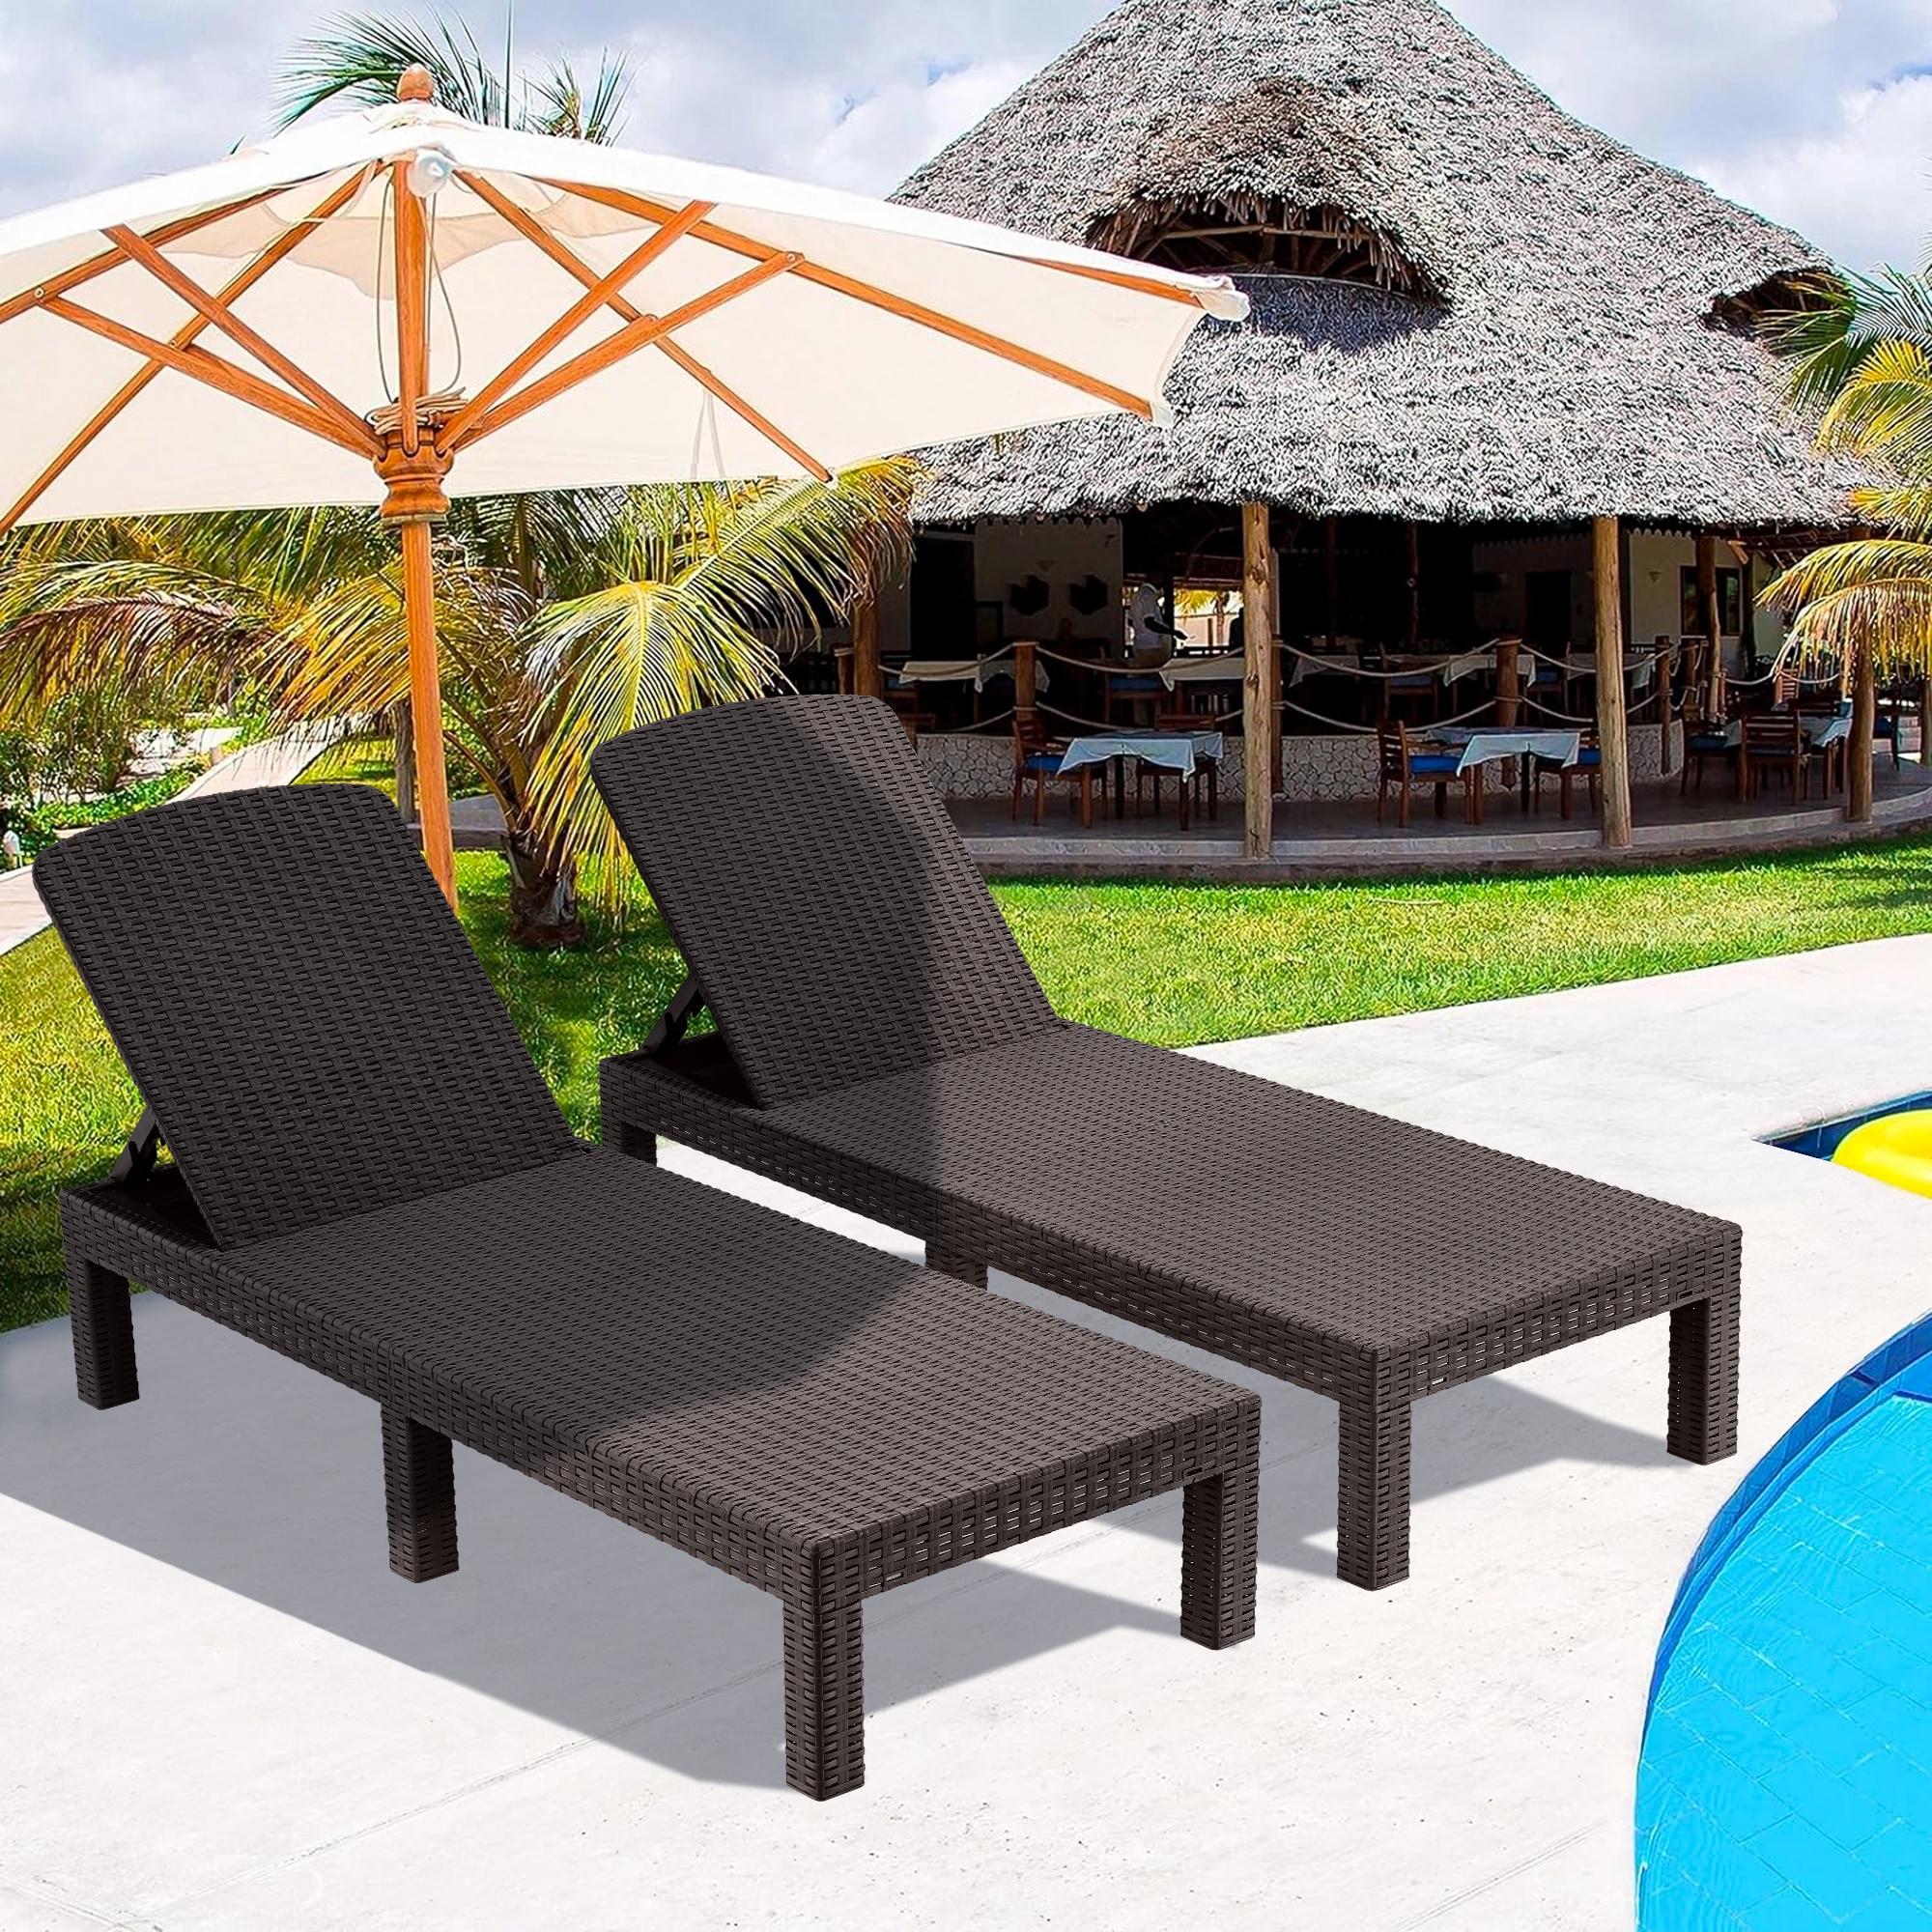 Syngar 2 Piece Chaise Lounge Set for Outside, Outdoor Adjustable Lounge Chairs Set of 2, Patio All-Weather PP Resin Reclining Chaise for Poolside Backyard Garden Porch, Espresso - image 1 of 10